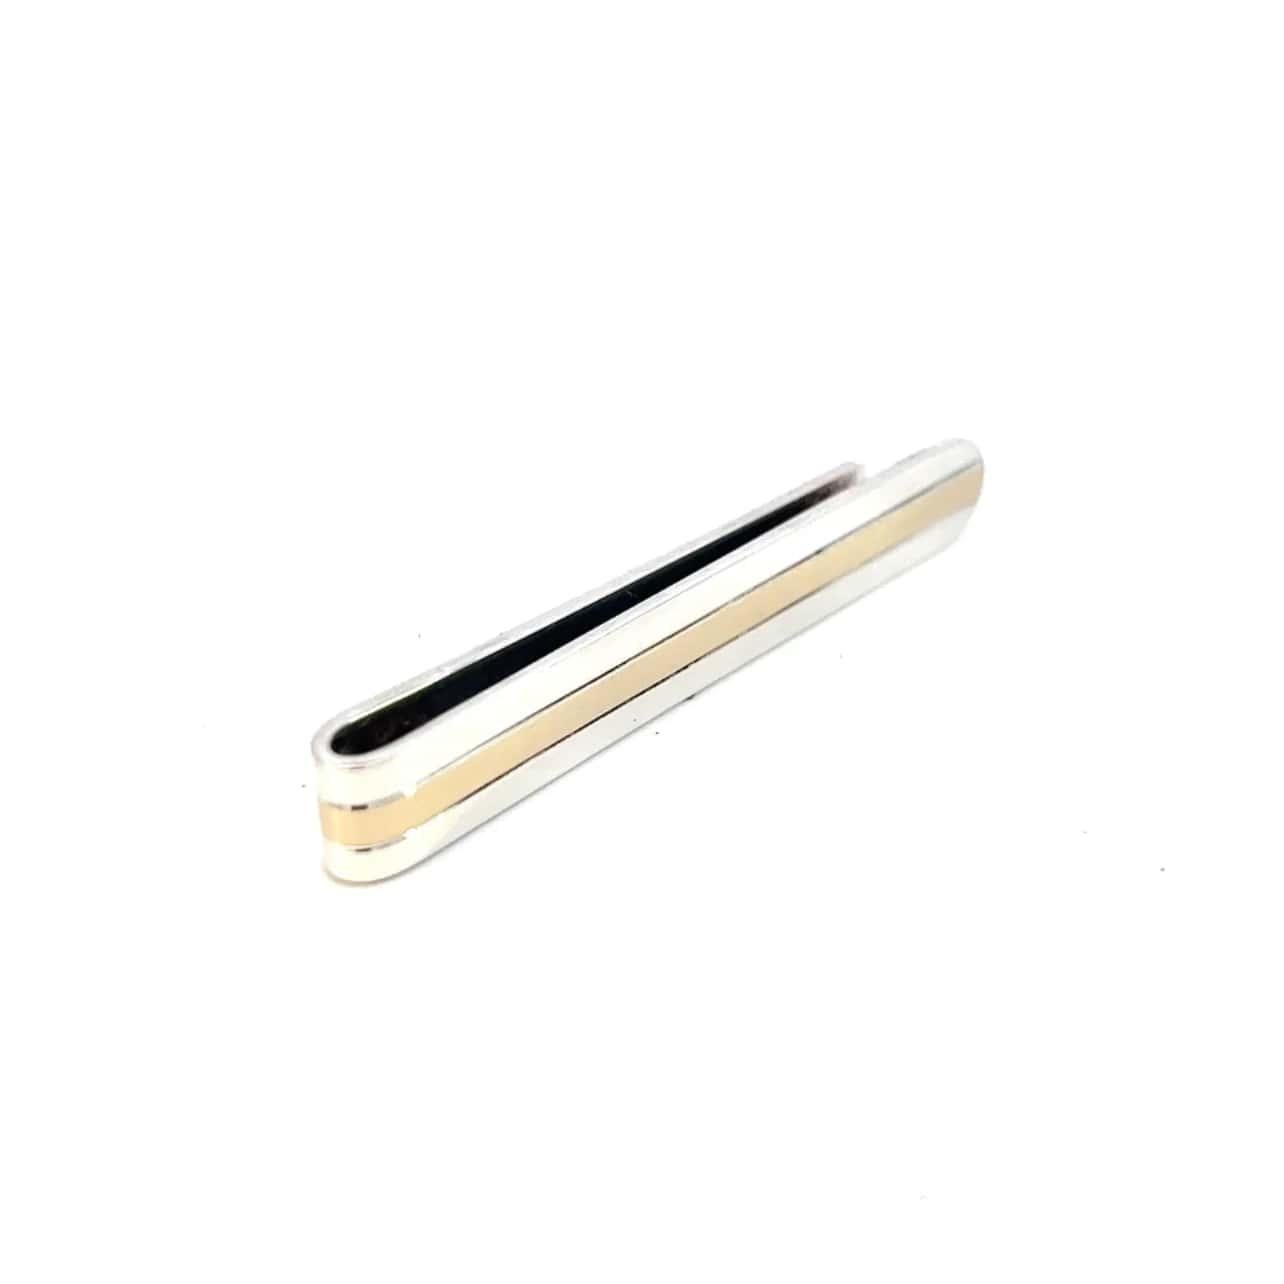 Authentic Tiffany & Co Estate Tie Clip Bar 14k Gold Sterling Silver TIF577

This elegant Authentic Tiffany & Co Estate tie clip is made of sterling silver & 14k yellow gold and weighs 8.51 Grams.

TRUSTED SELLER SINCE 2002

PLEASE SEE OUR HUNDREDS